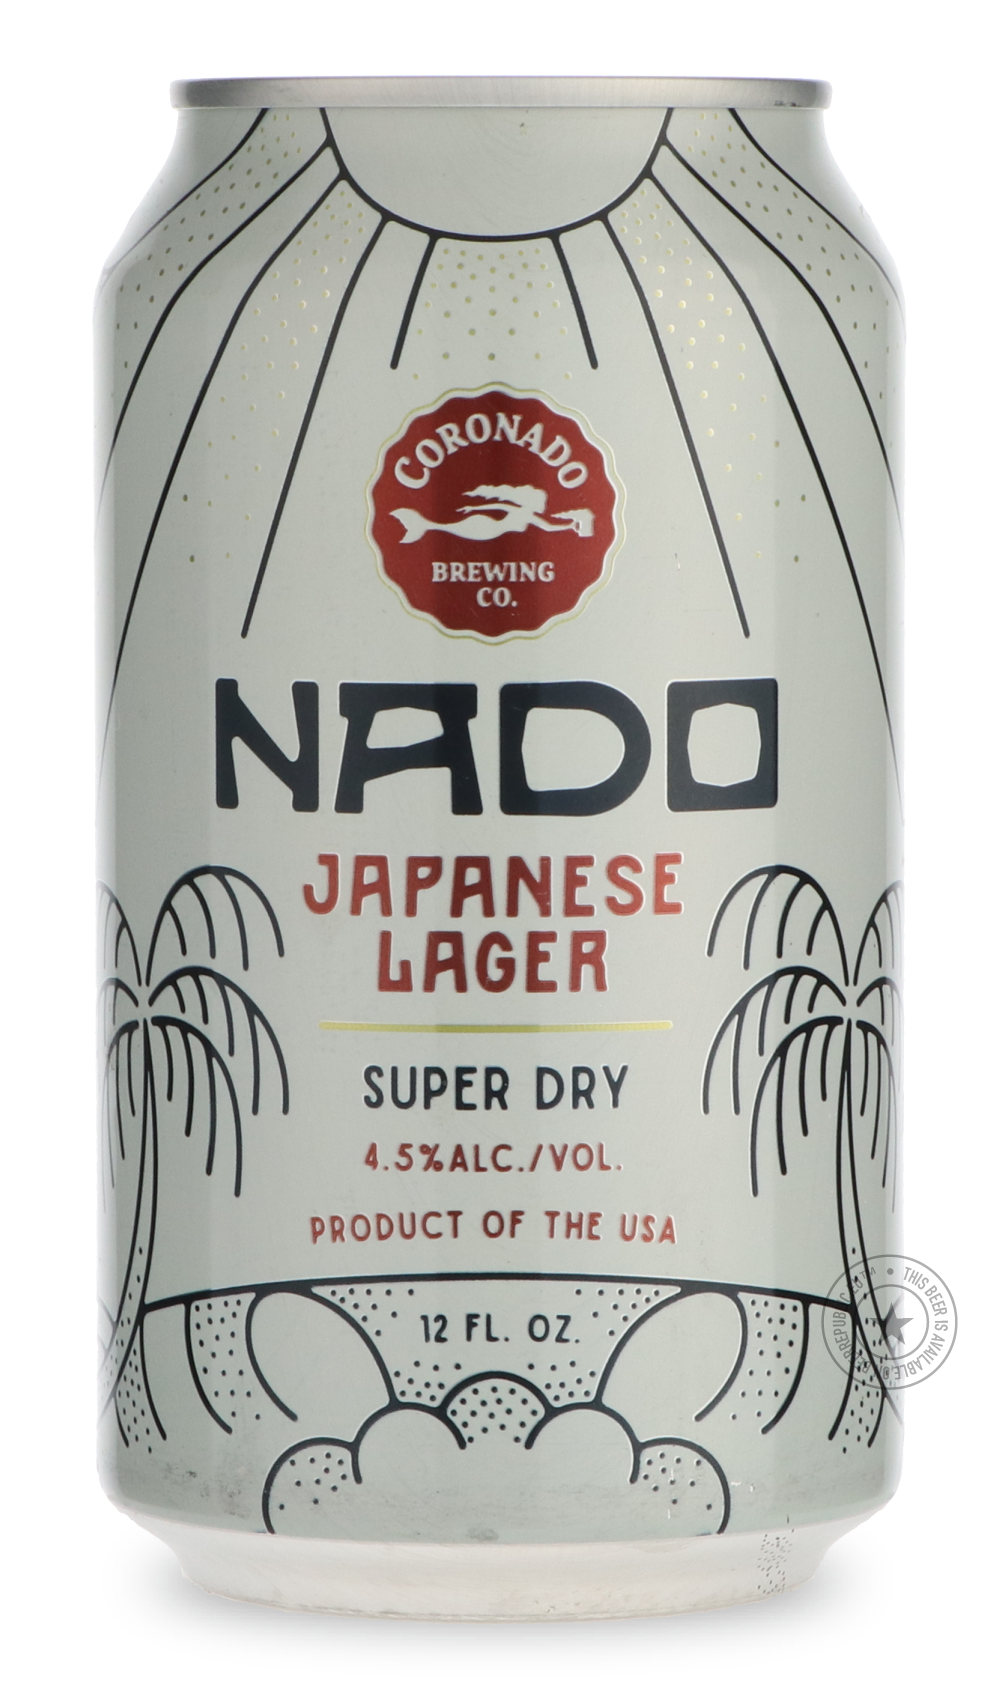 -Coronado- Nado-Pale- Only @ Beer Republic - The best online beer store for American & Canadian craft beer - Buy beer online from the USA and Canada - Bier online kopen - Amerikaans bier kopen - Craft beer store - Craft beer kopen - Amerikanisch bier kaufen - Bier online kaufen - Acheter biere online - IPA - Stout - Porter - New England IPA - Hazy IPA - Imperial Stout - Barrel Aged - Barrel Aged Imperial Stout - Brown - Dark beer - Blond - Blonde - Pilsner - Lager - Wheat - Weizen - Amber - Barley Wine - Qu